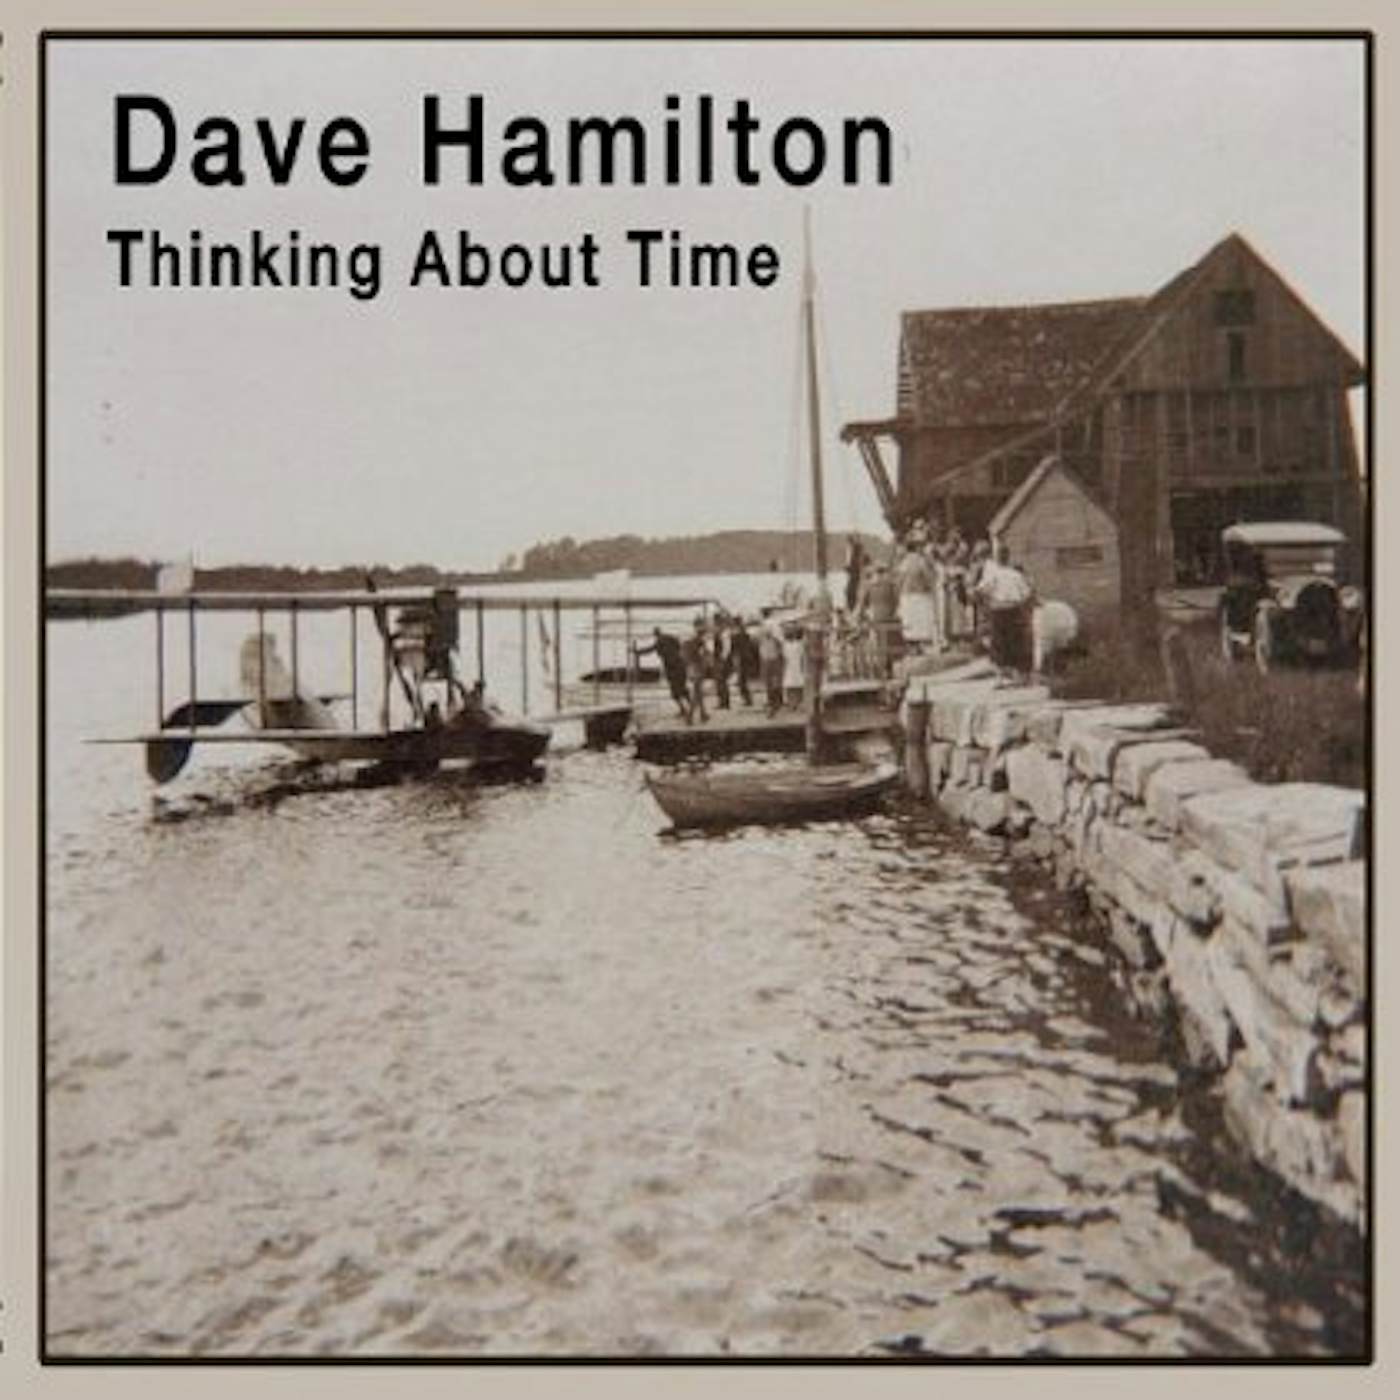 Dave Hamilton THINKING ABOUT TIME CD